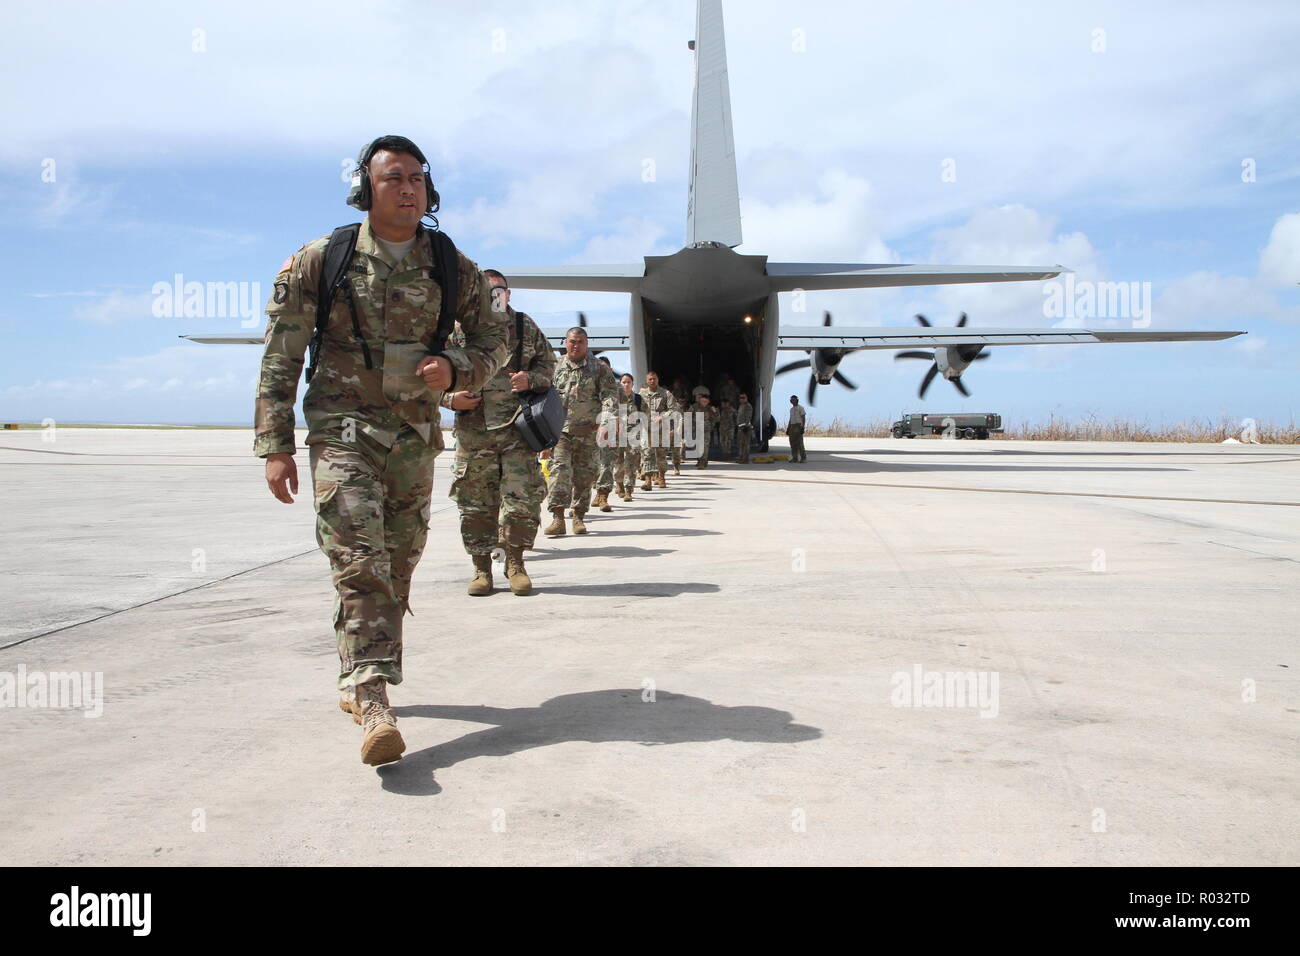 saipan-commonwealth-of-the-northern-mariana-islands-guam-based-soldiers-with-the-9th-mission-support-command-us-army-reserve-and-the-guam-army-national-guard-make-their-way-out-of-a-us-air-force-c-130-at-the-francisco-c-ada-international-airport-nov-1-recovery-efforts-continue-throughout-the-mariana-islands-in-response-to-super-typhoon-yutu-which-left-thousands-of-residents-without-electricity-or-running-water-service-members-from-joint-region-marianas-and-indo-pacific-command-are-providing-department-of-defense-support-to-the-commonwealth-of-the-northern-mariana-islands-civil-R032TD.jpg